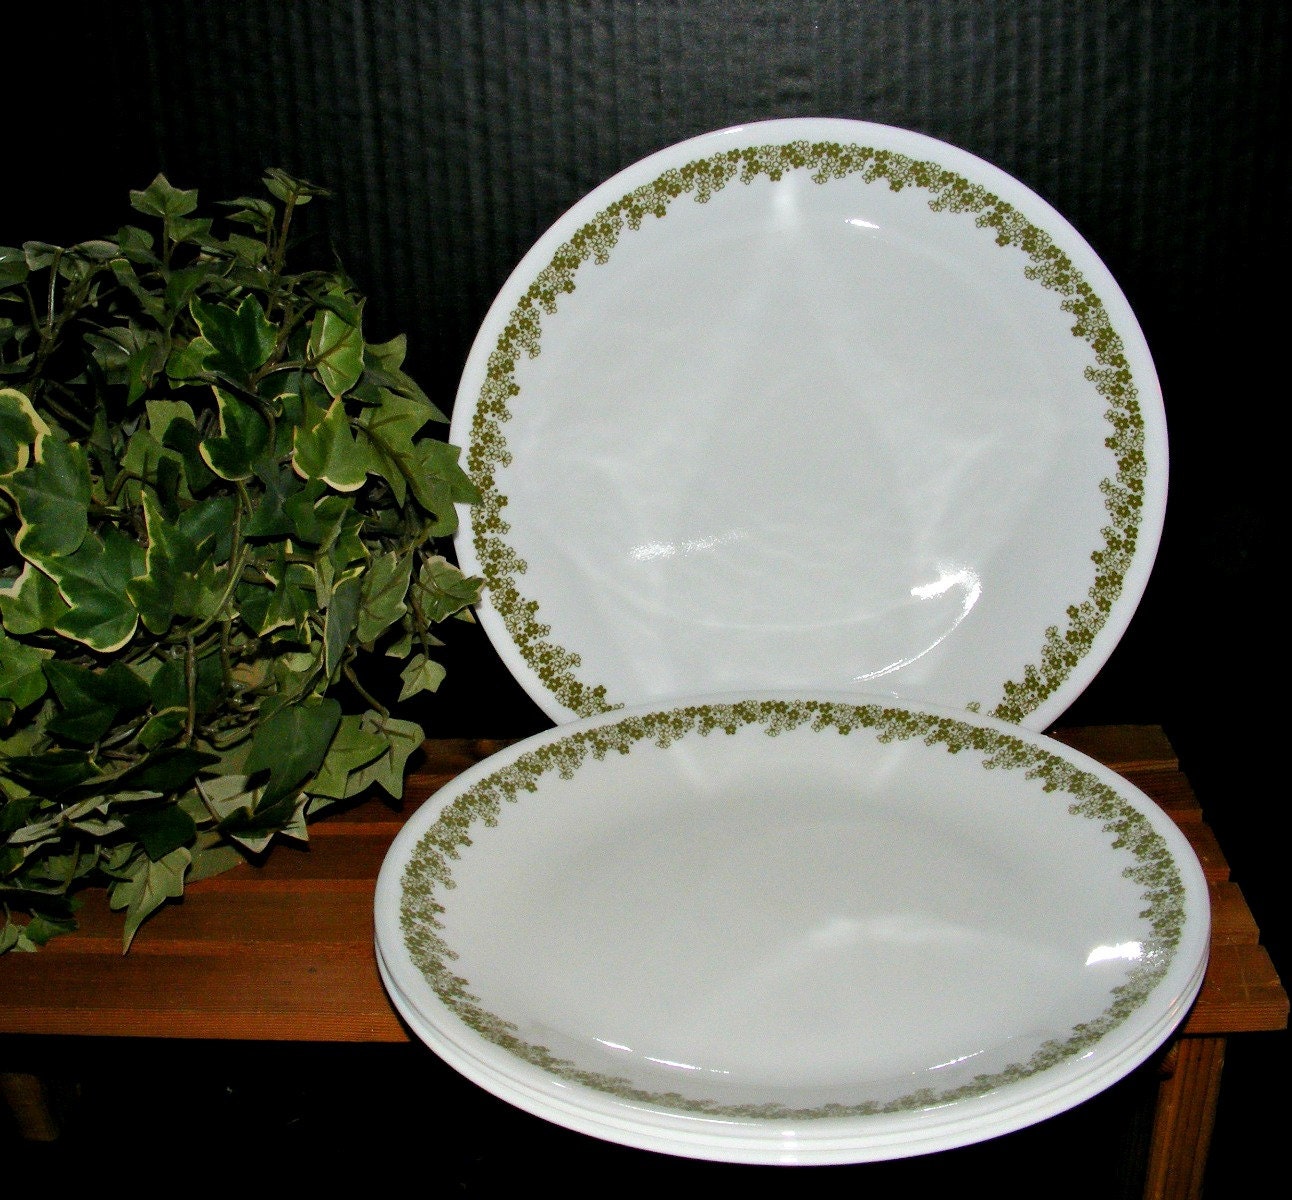 4 Vintage Corelle Crazy Daisy Green Dinner Plates by SeLEcTiViTiEs